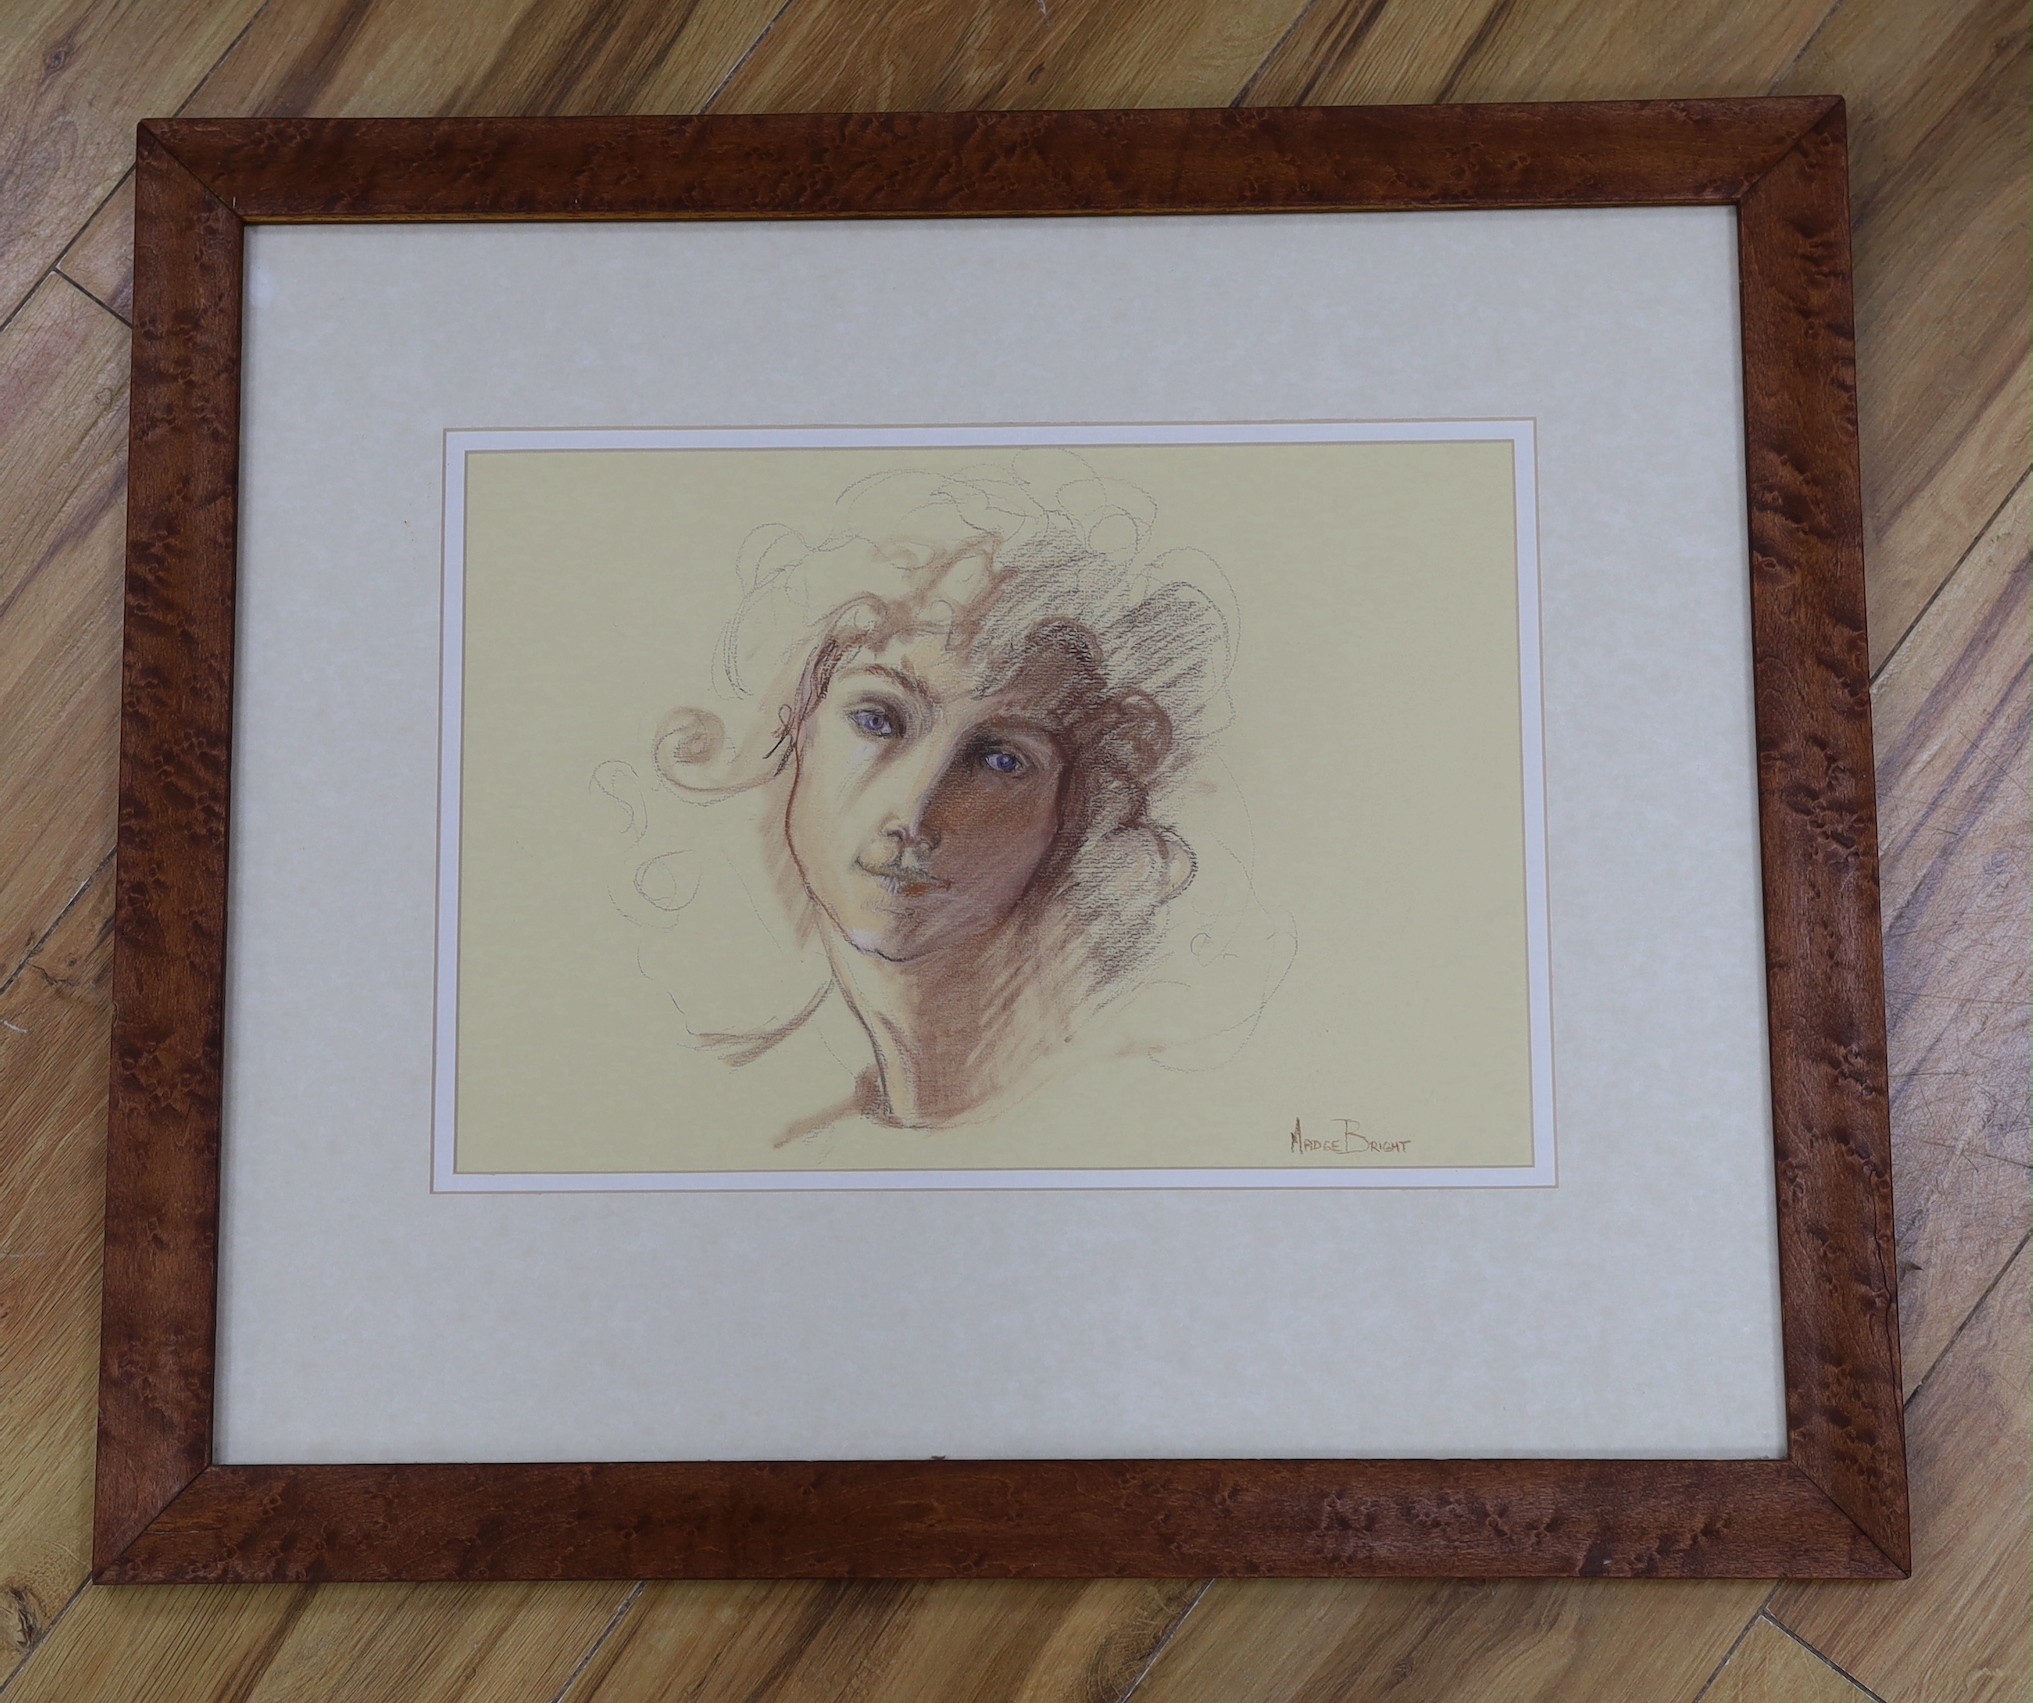 Madge Bright, pastel, Head study of a lady, signed, 27 x 39cm